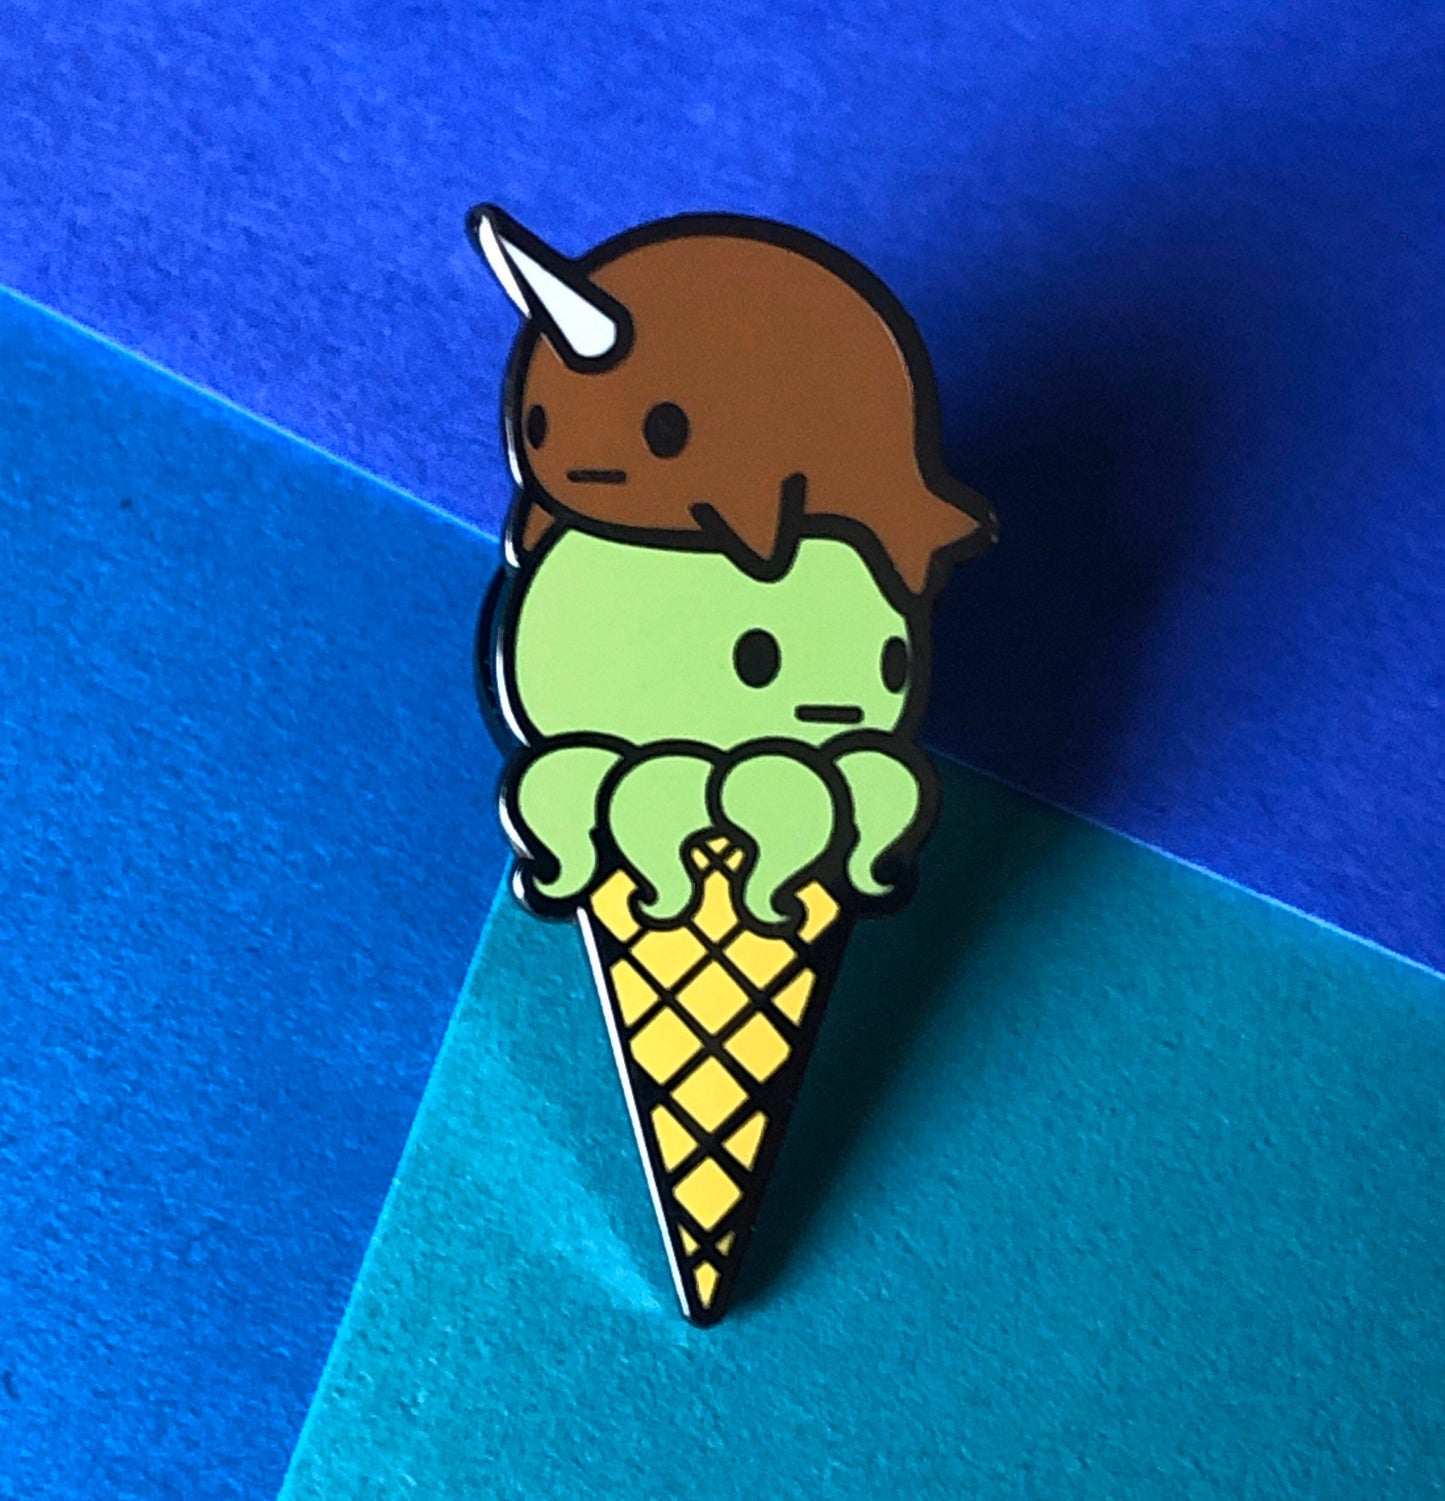 Narwhal Octopus Ice Cream - Mint Chocolate Ice Cream Enamel Pin, Cute Ice Cream Pin, Octopus Pin, Narwhal Pin, Ice Cream Cone Pin